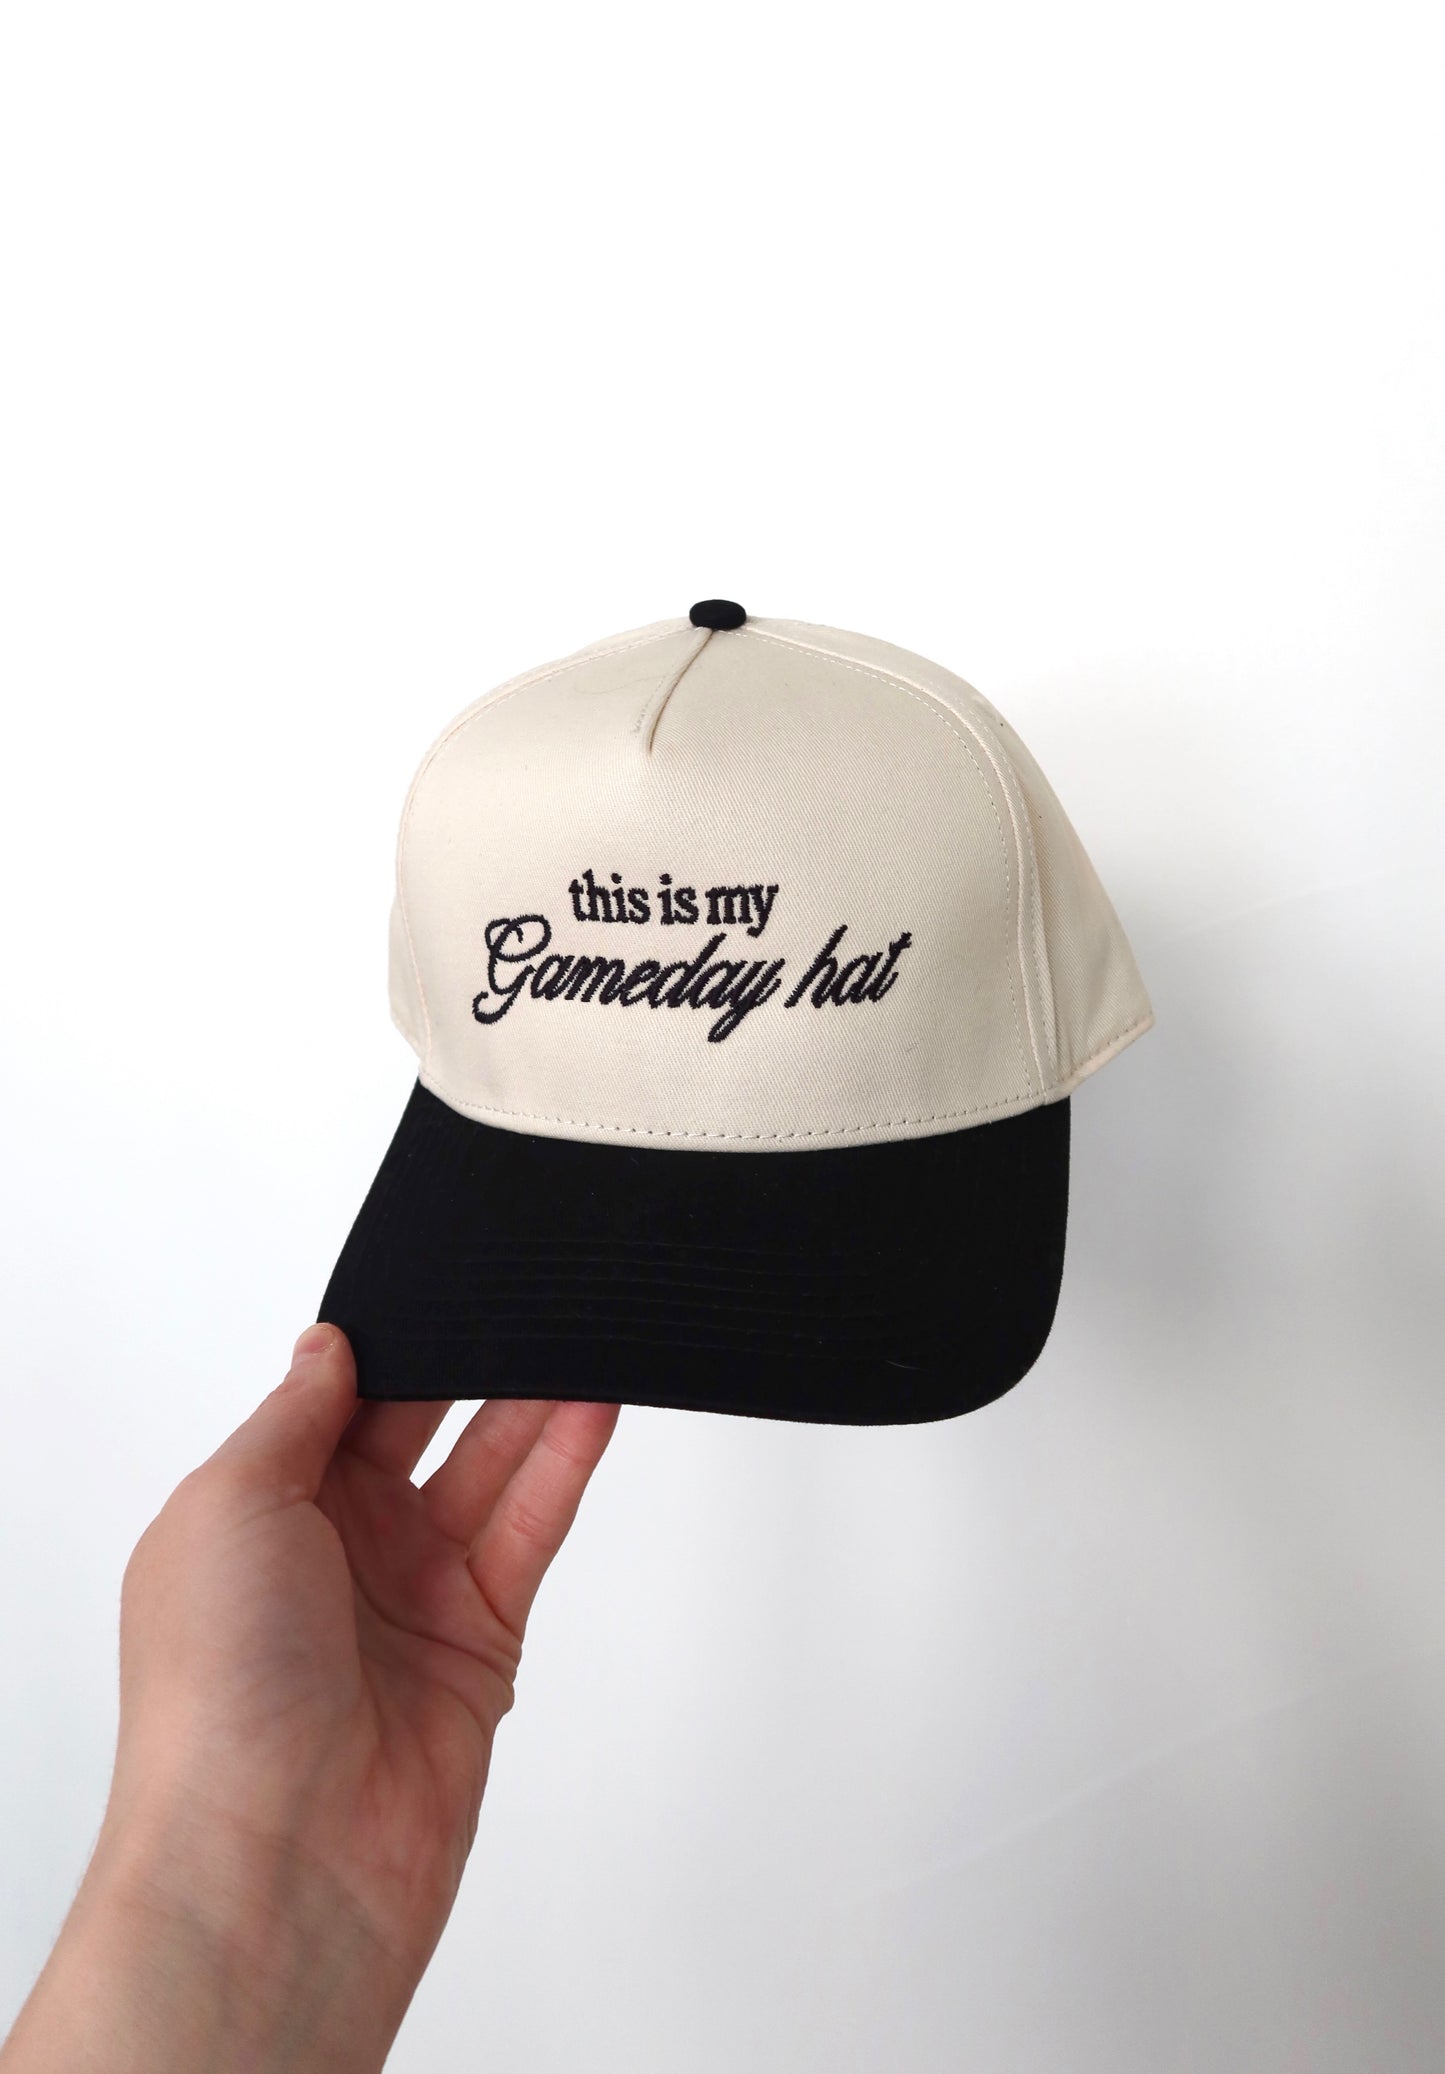 “This Is My Gameday Hat” Vintage Trucker Hat